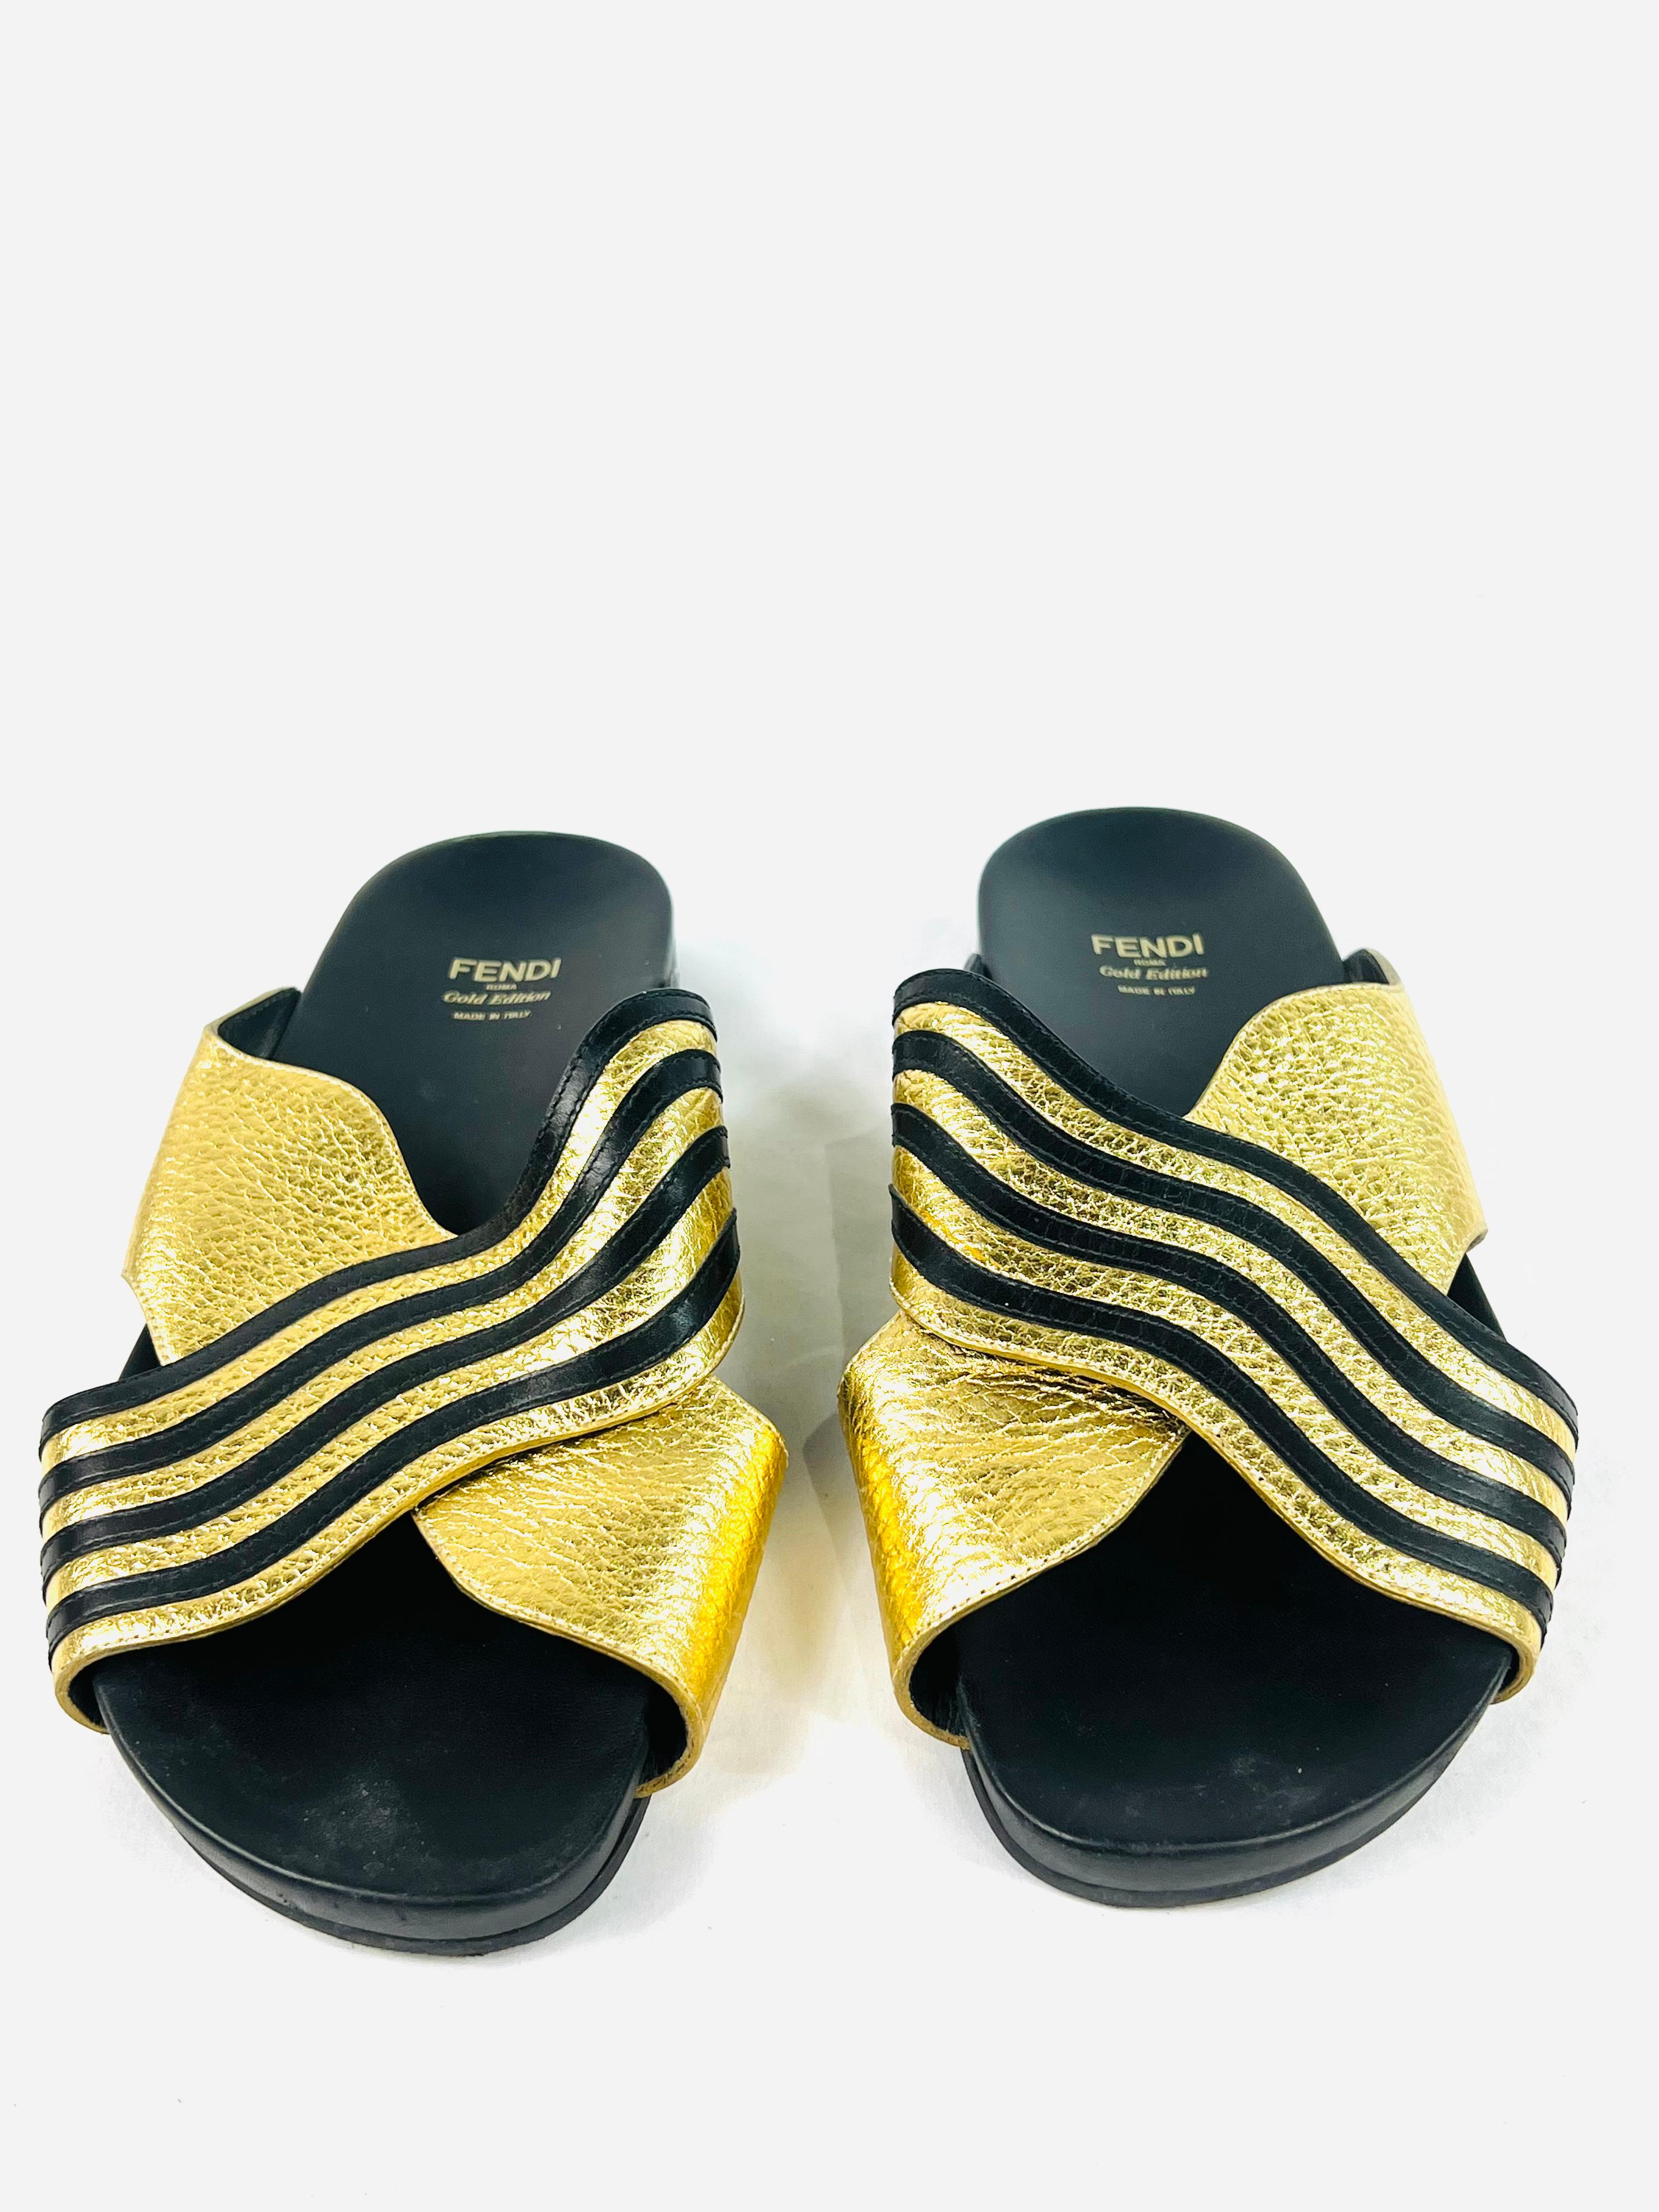 Product details:

The shoes feature gladiator style, gold and black leather and cross style with wavy motif.